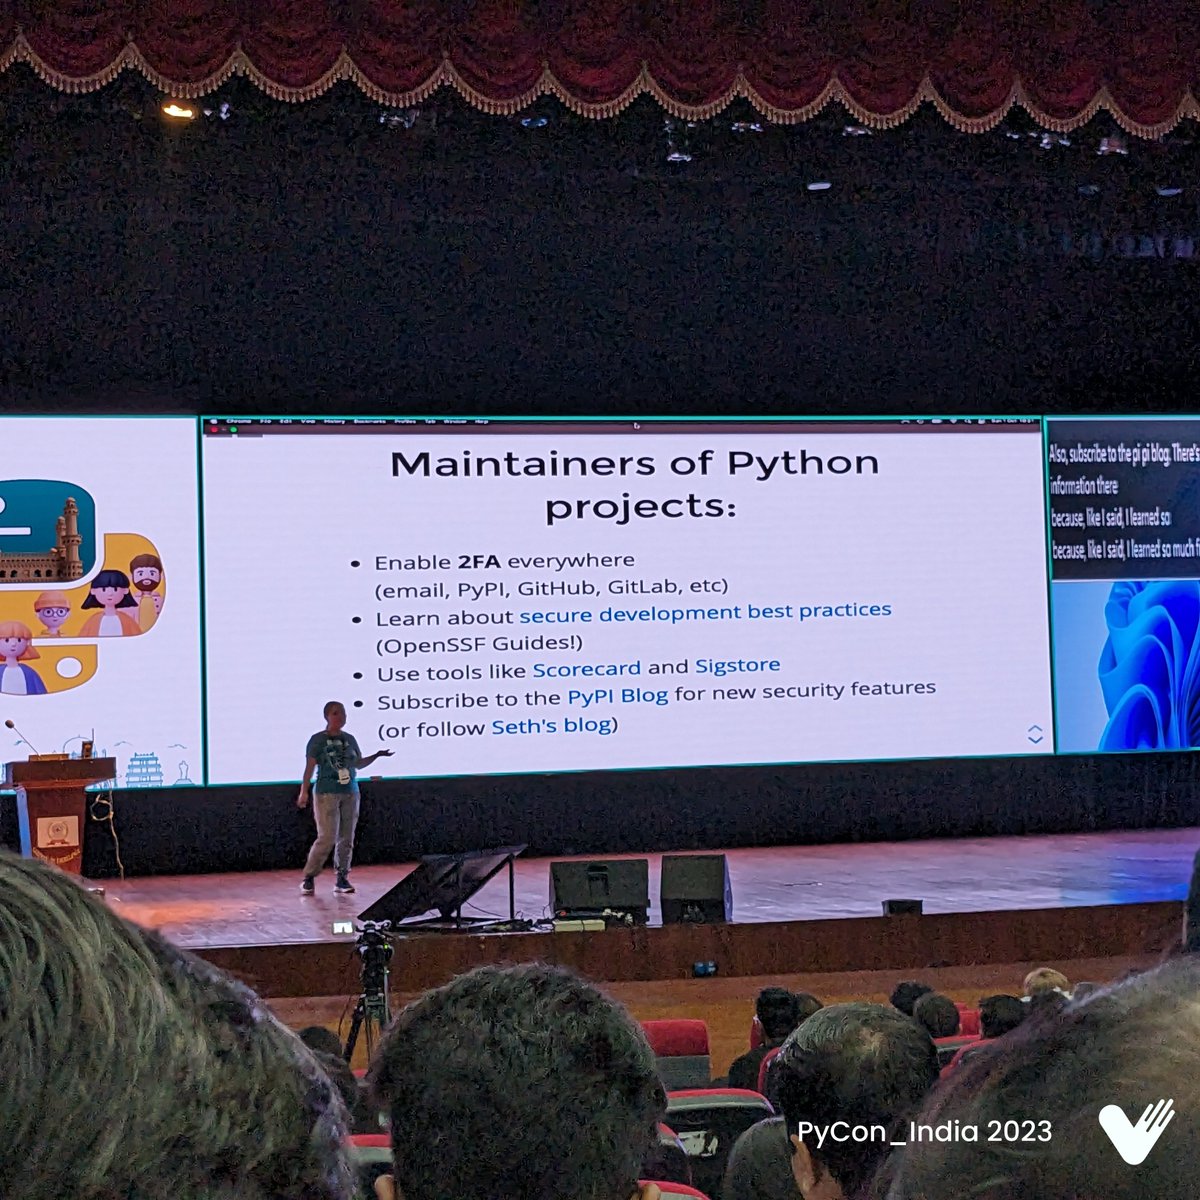 Venzo Technologies had an incredible time at PyCon India 2023! 🐍✨

It was an honor to be part of this premier conference, and we're excited to bring back new insights and ideas to fuel our innovation.

.
.
#PythonForAll #PyconIndia2023 #PyconIndia  #pyconf #Venzoian #Venzo